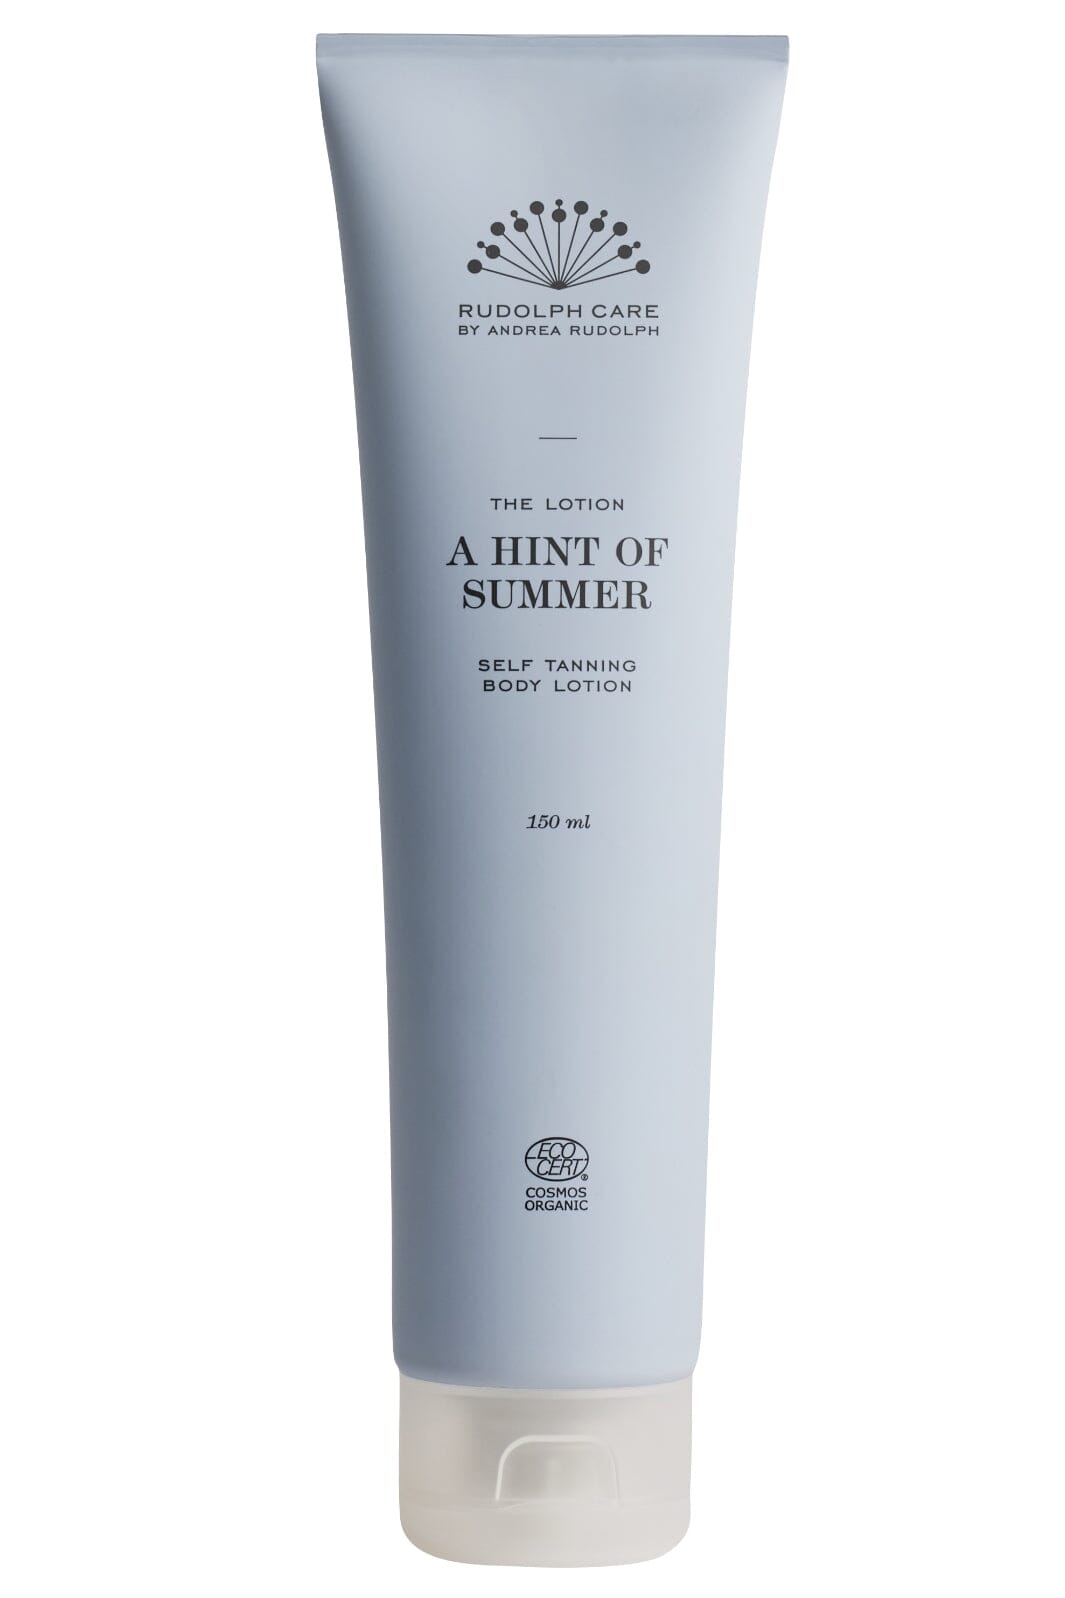 Rudolph Care - A Hint of Summer - The Lotion Body lotion 